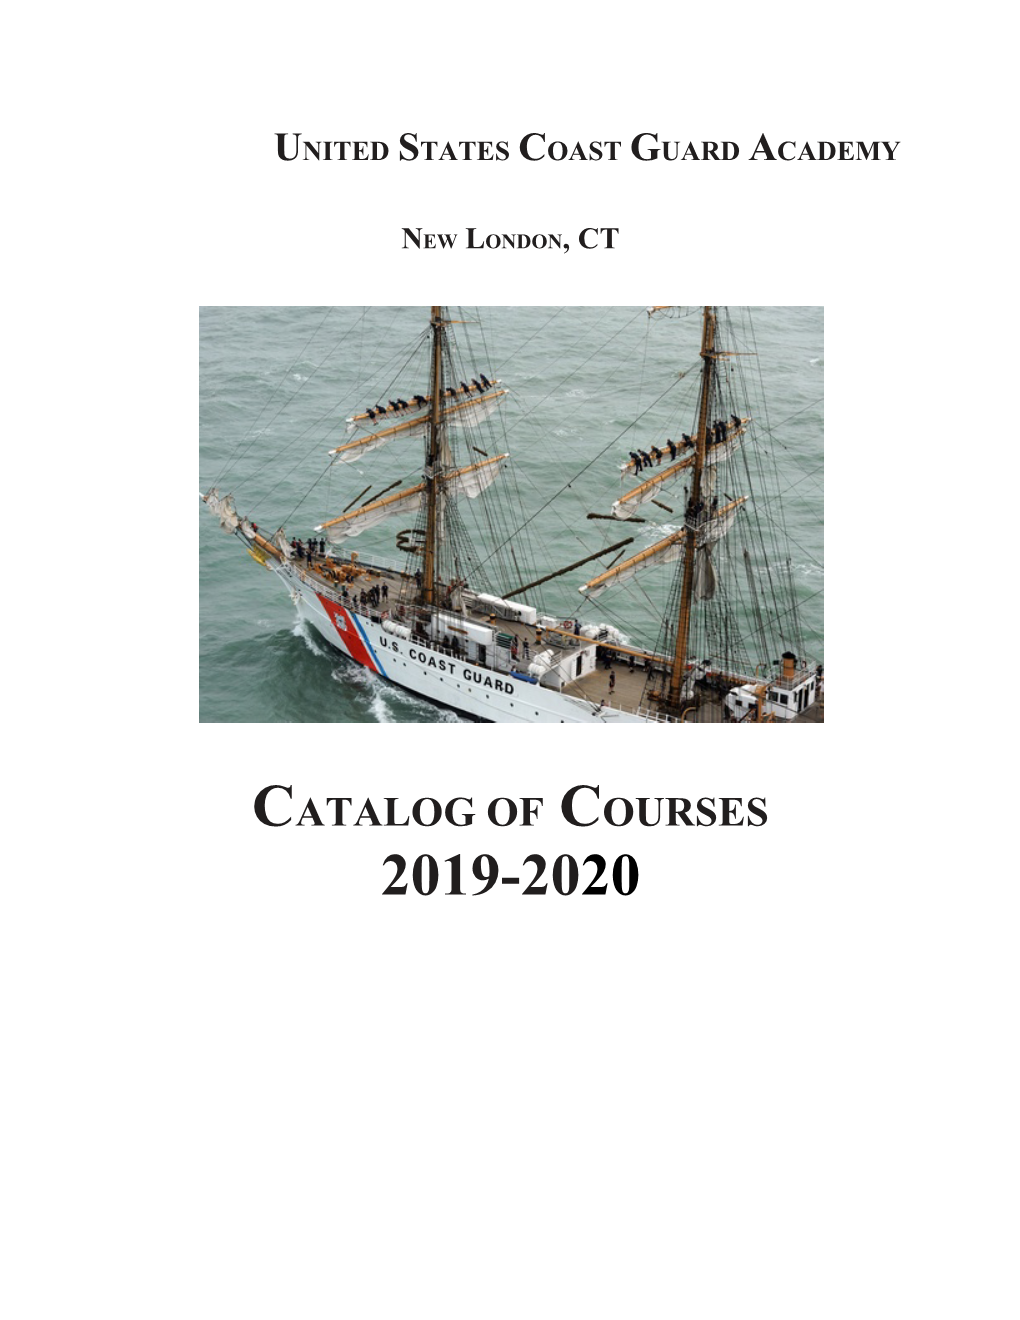 2019-2020 Catalog of Courses